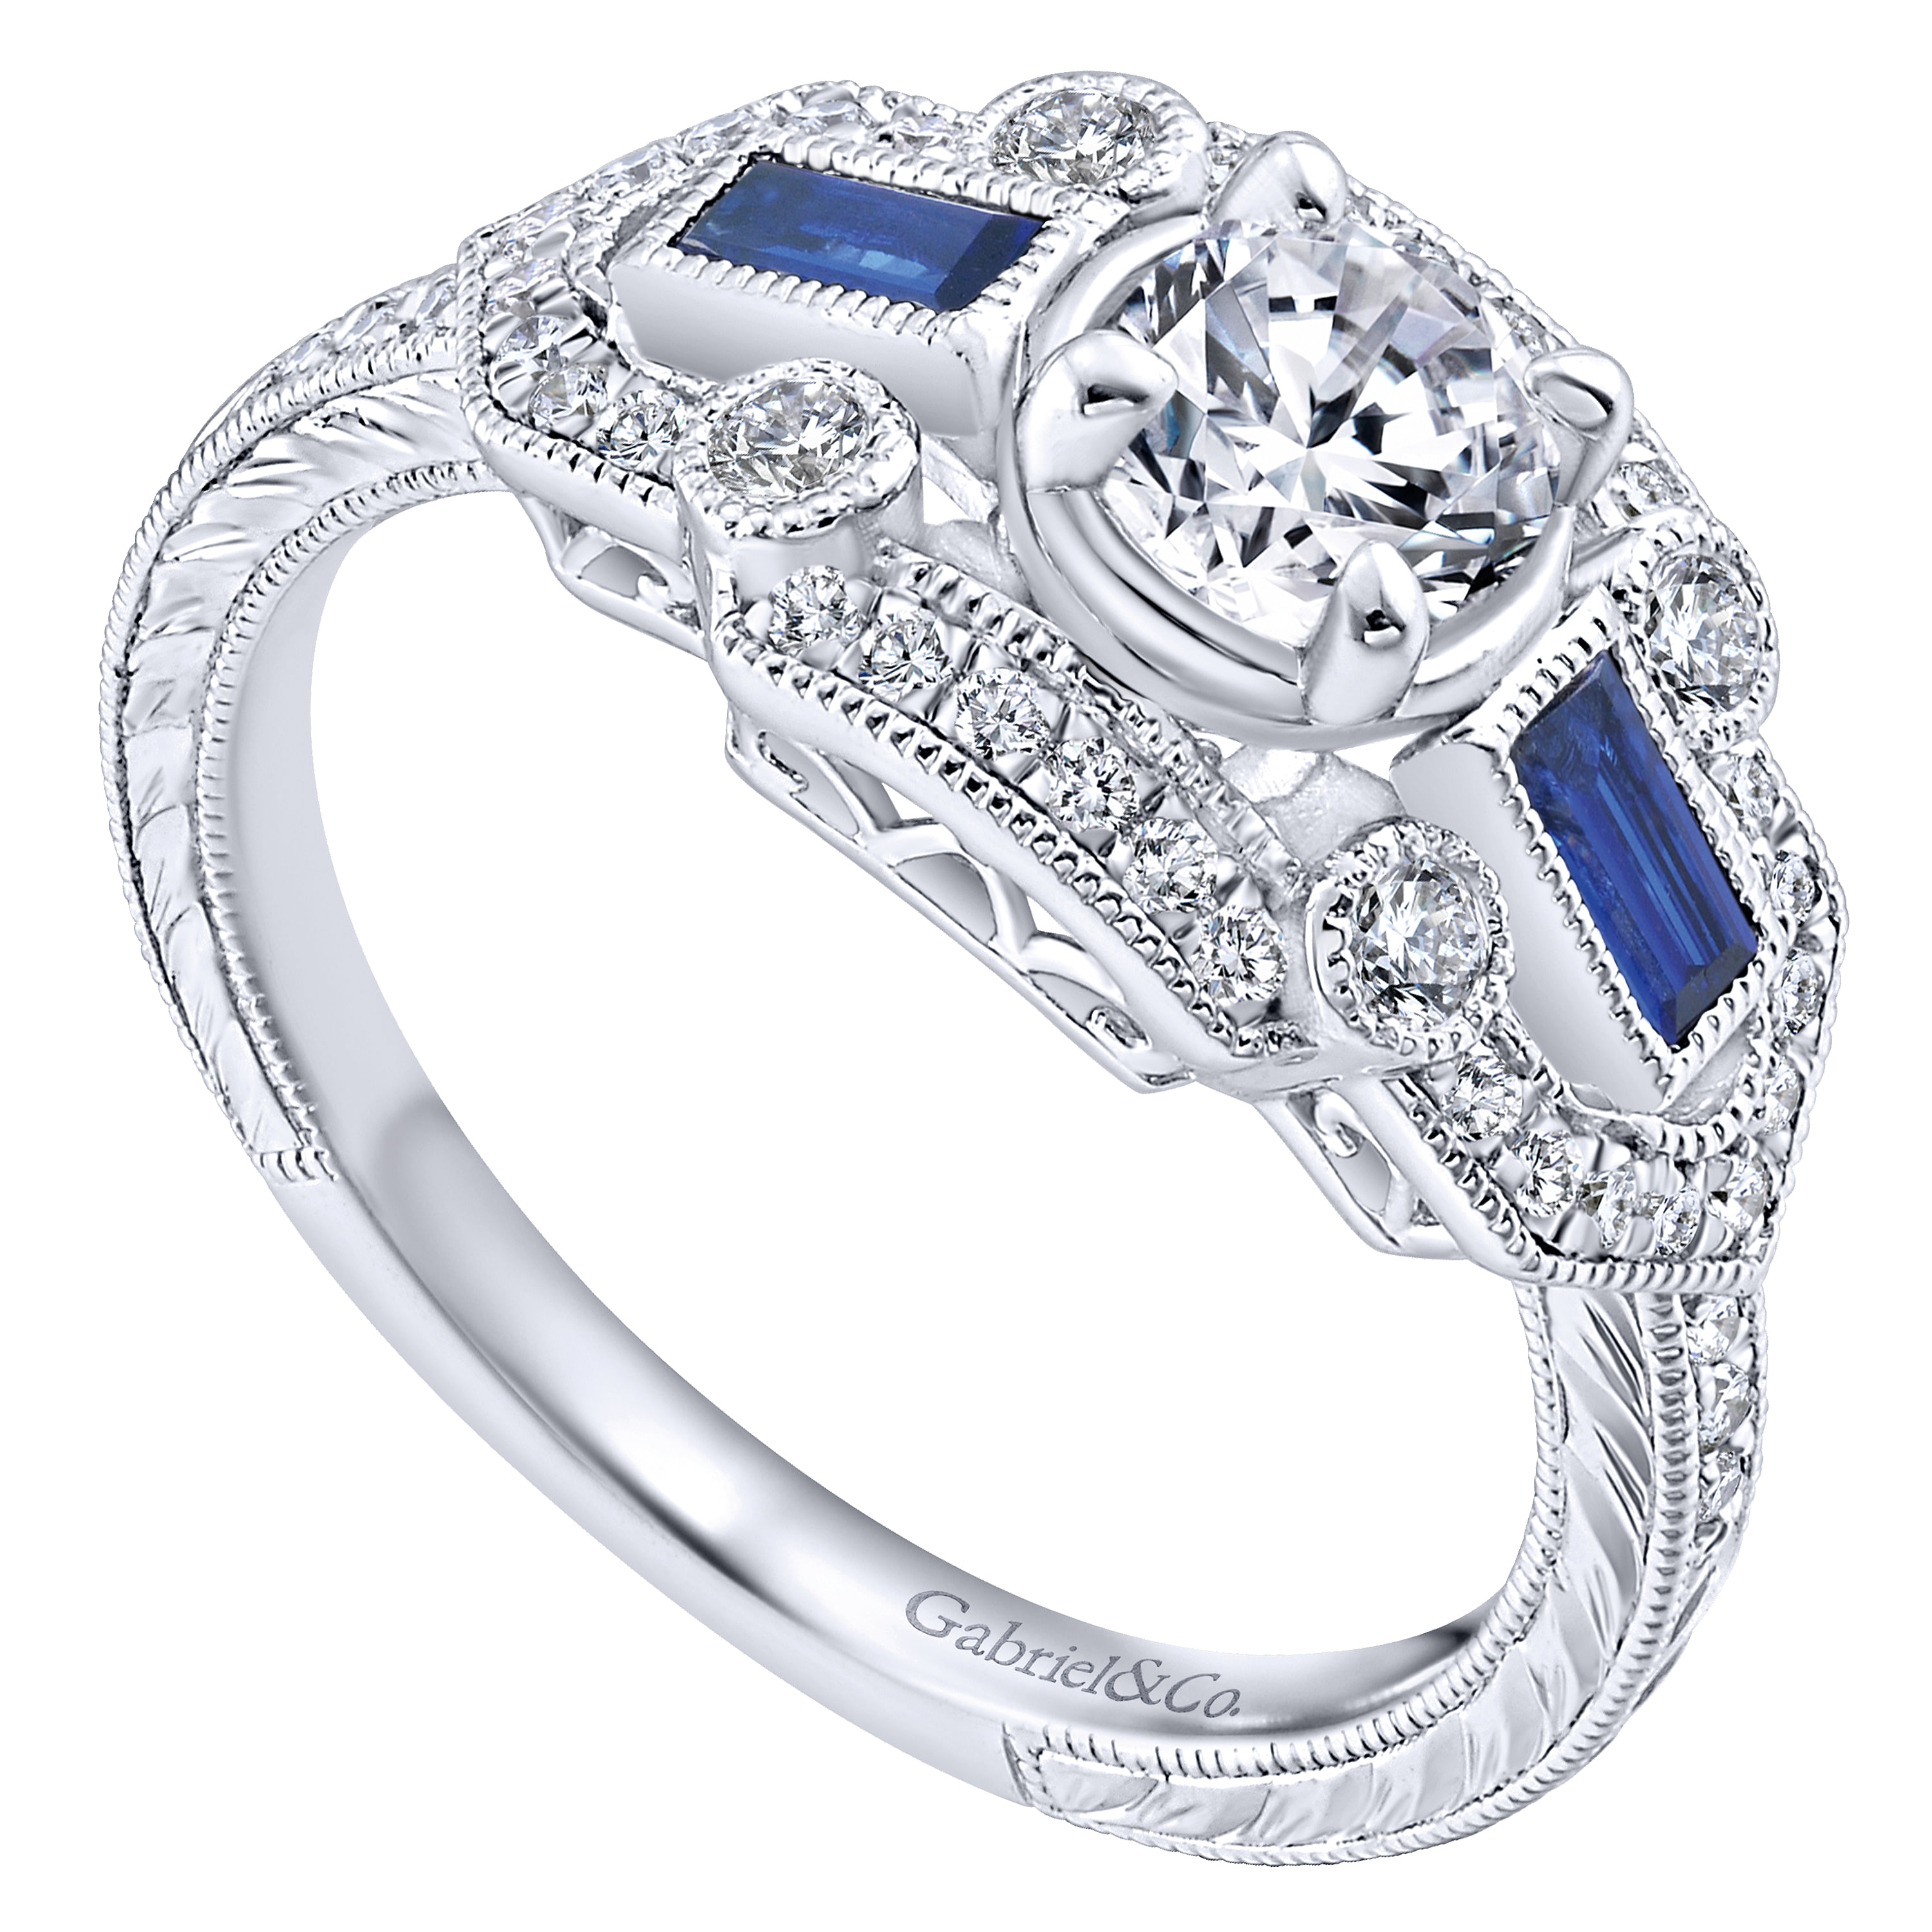 Vintage Inspired 14K White Gold Three Stone Halo Sapphire and Diamond Complete Engagement Ring